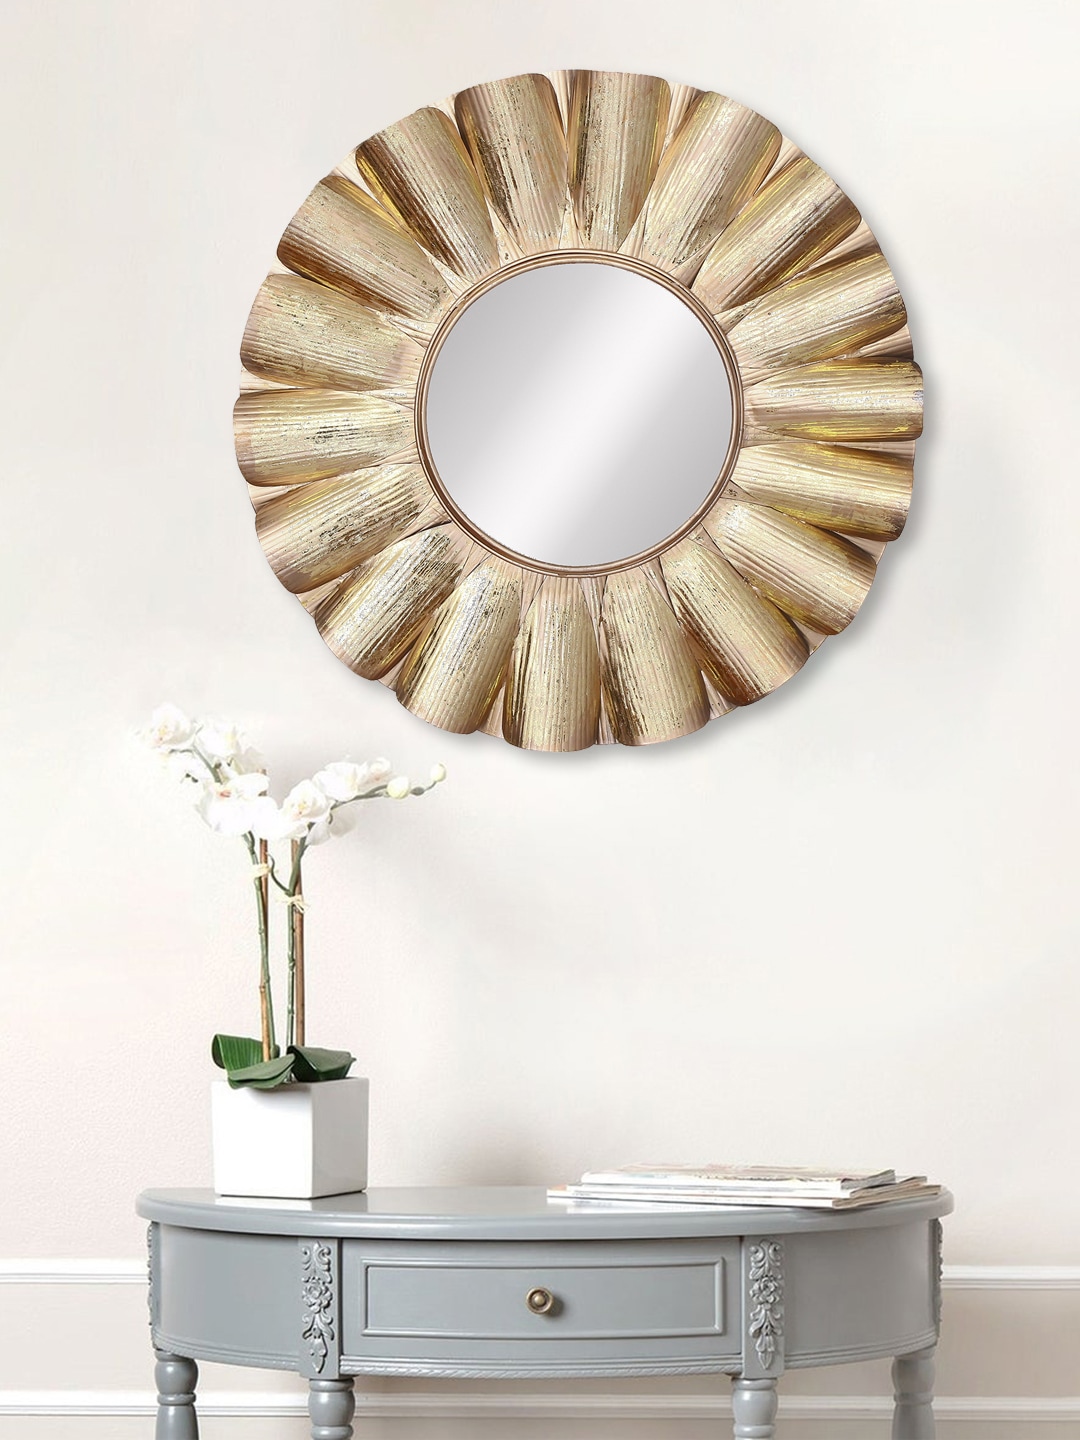 eCraftIndia Gold-Toned Decorative Metal Handcarved Wall Mirror Price in India